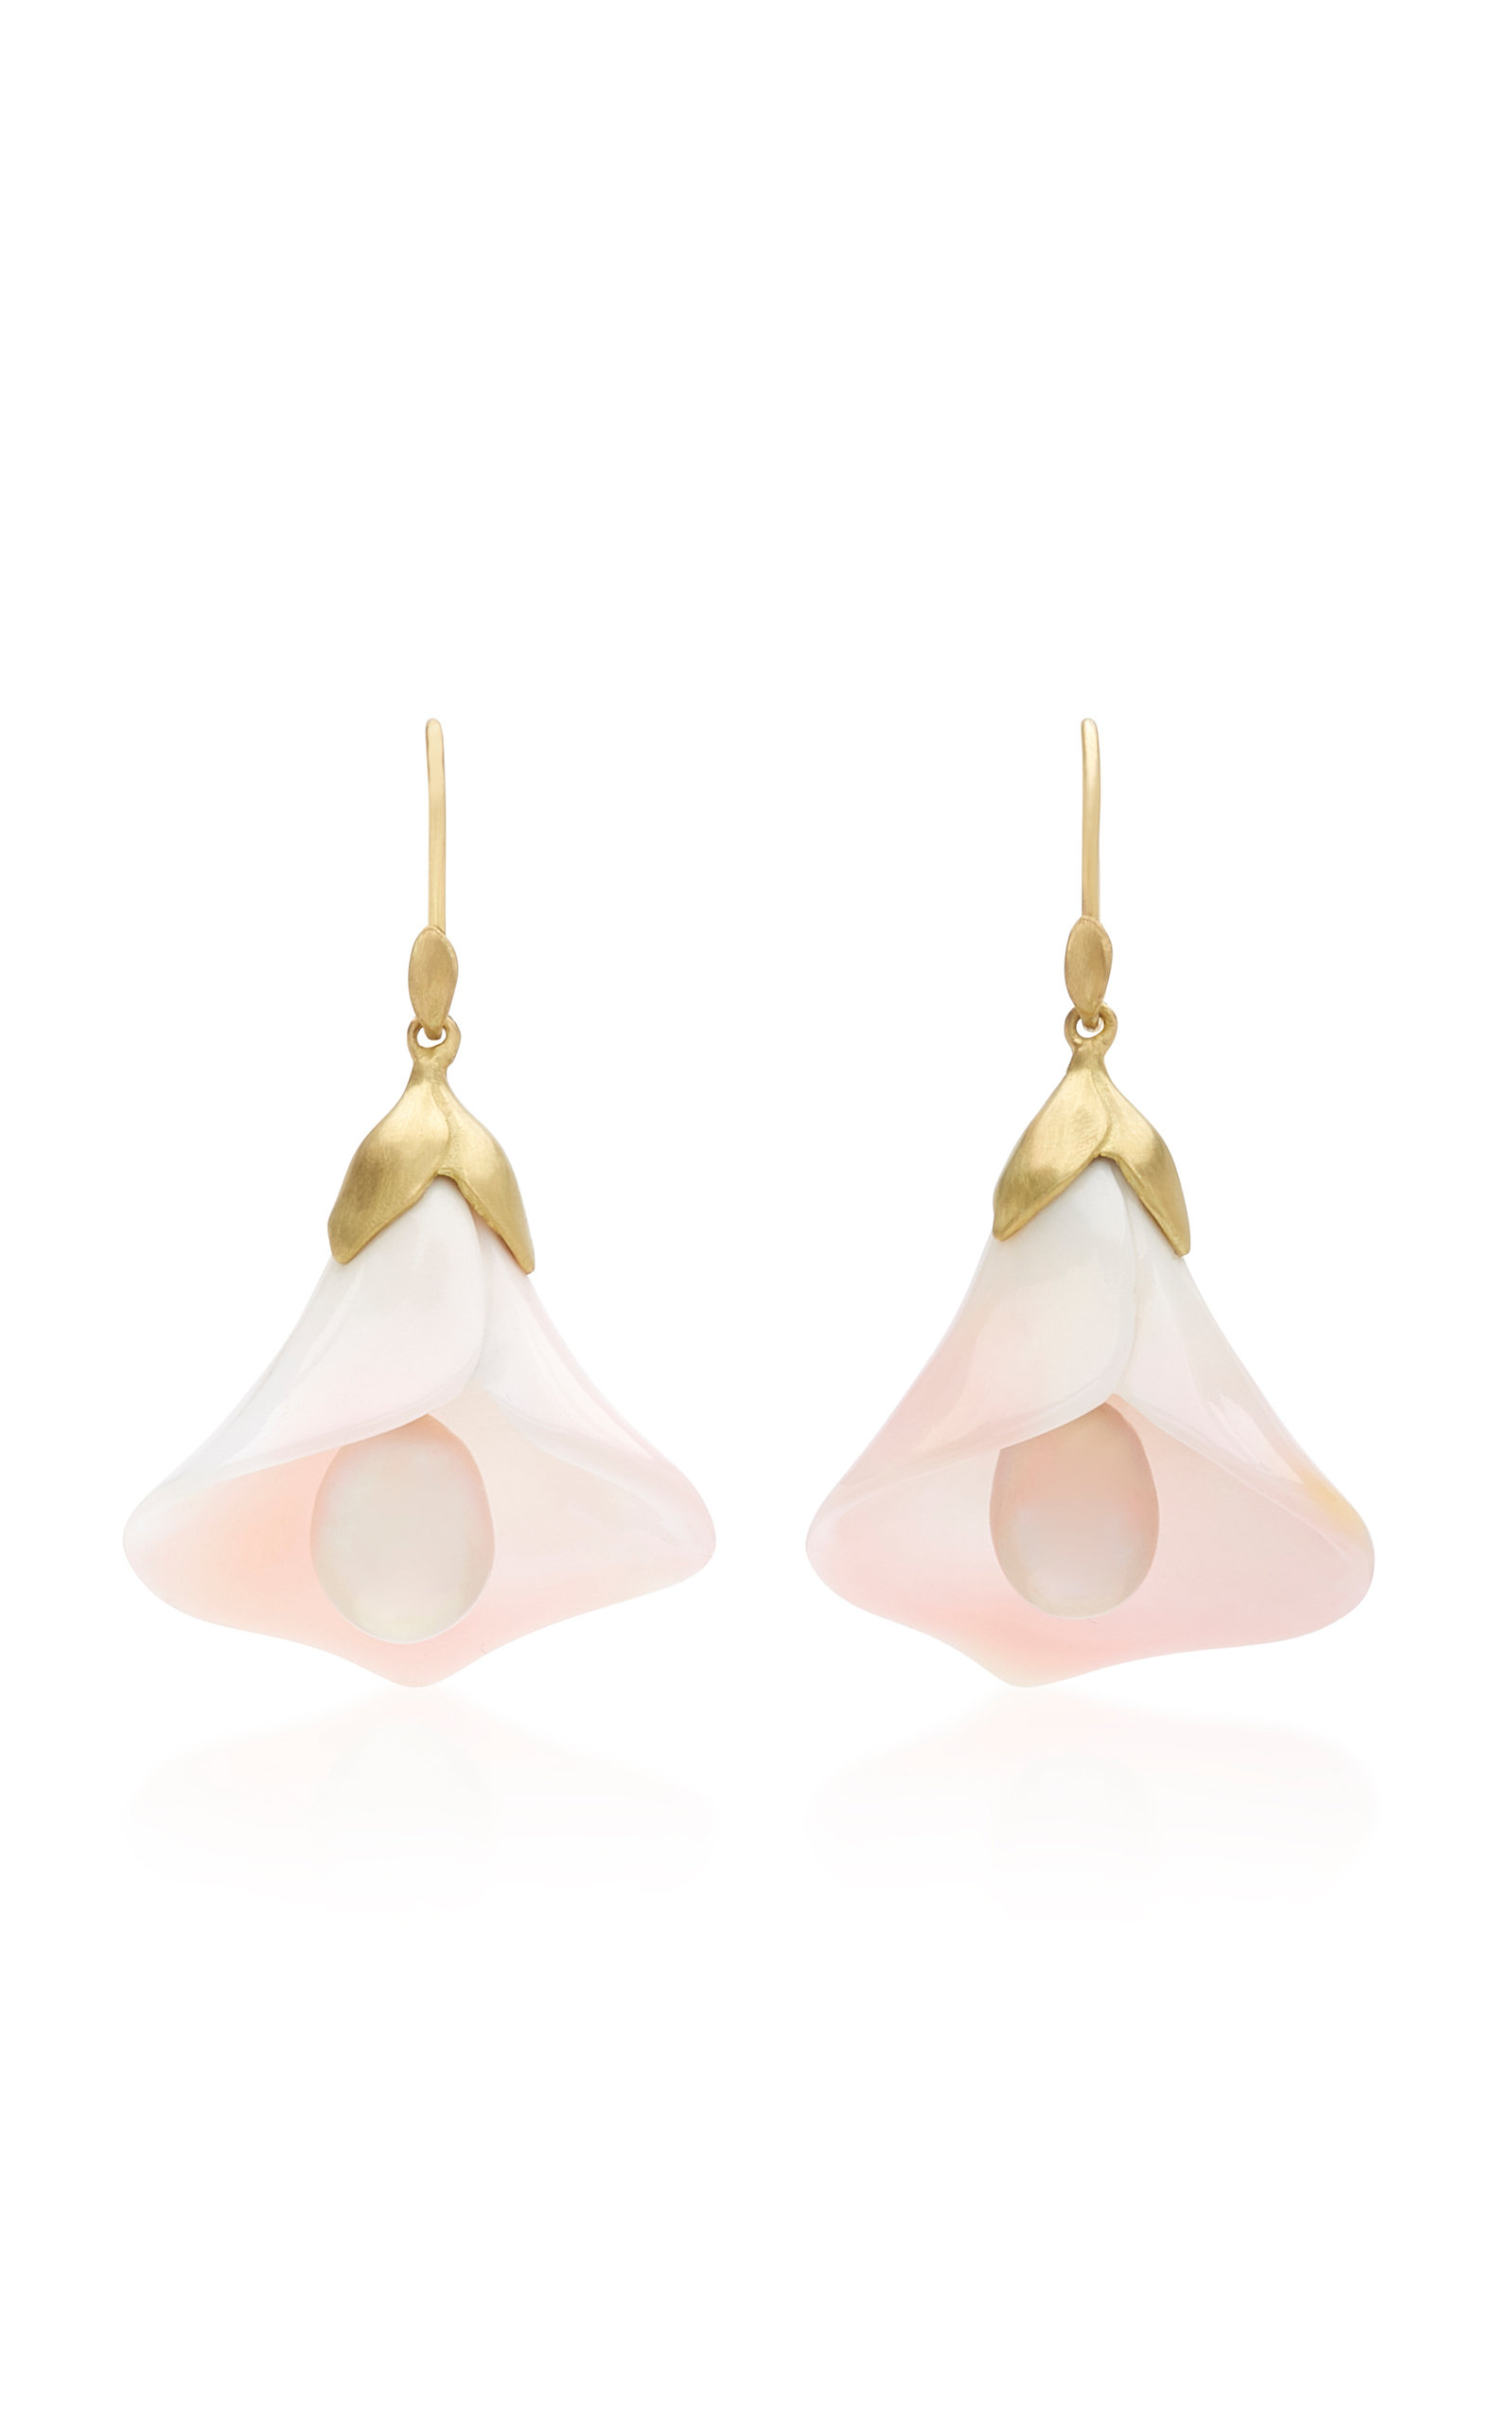 18K Gold; Pearl And Conch Earrings